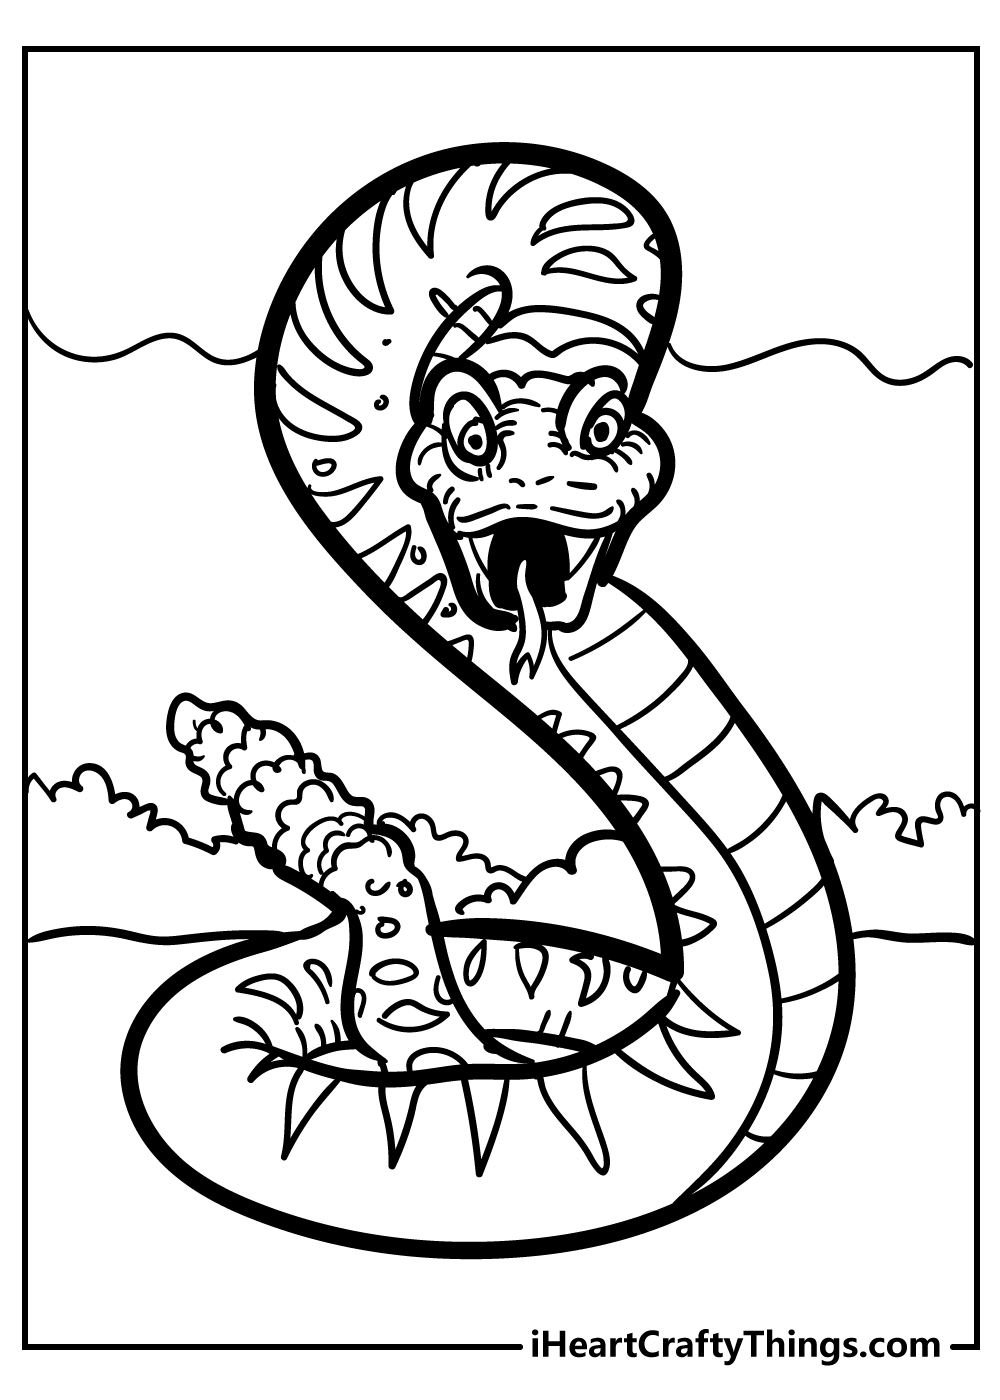 Snake Coloring Pages Updated 2021